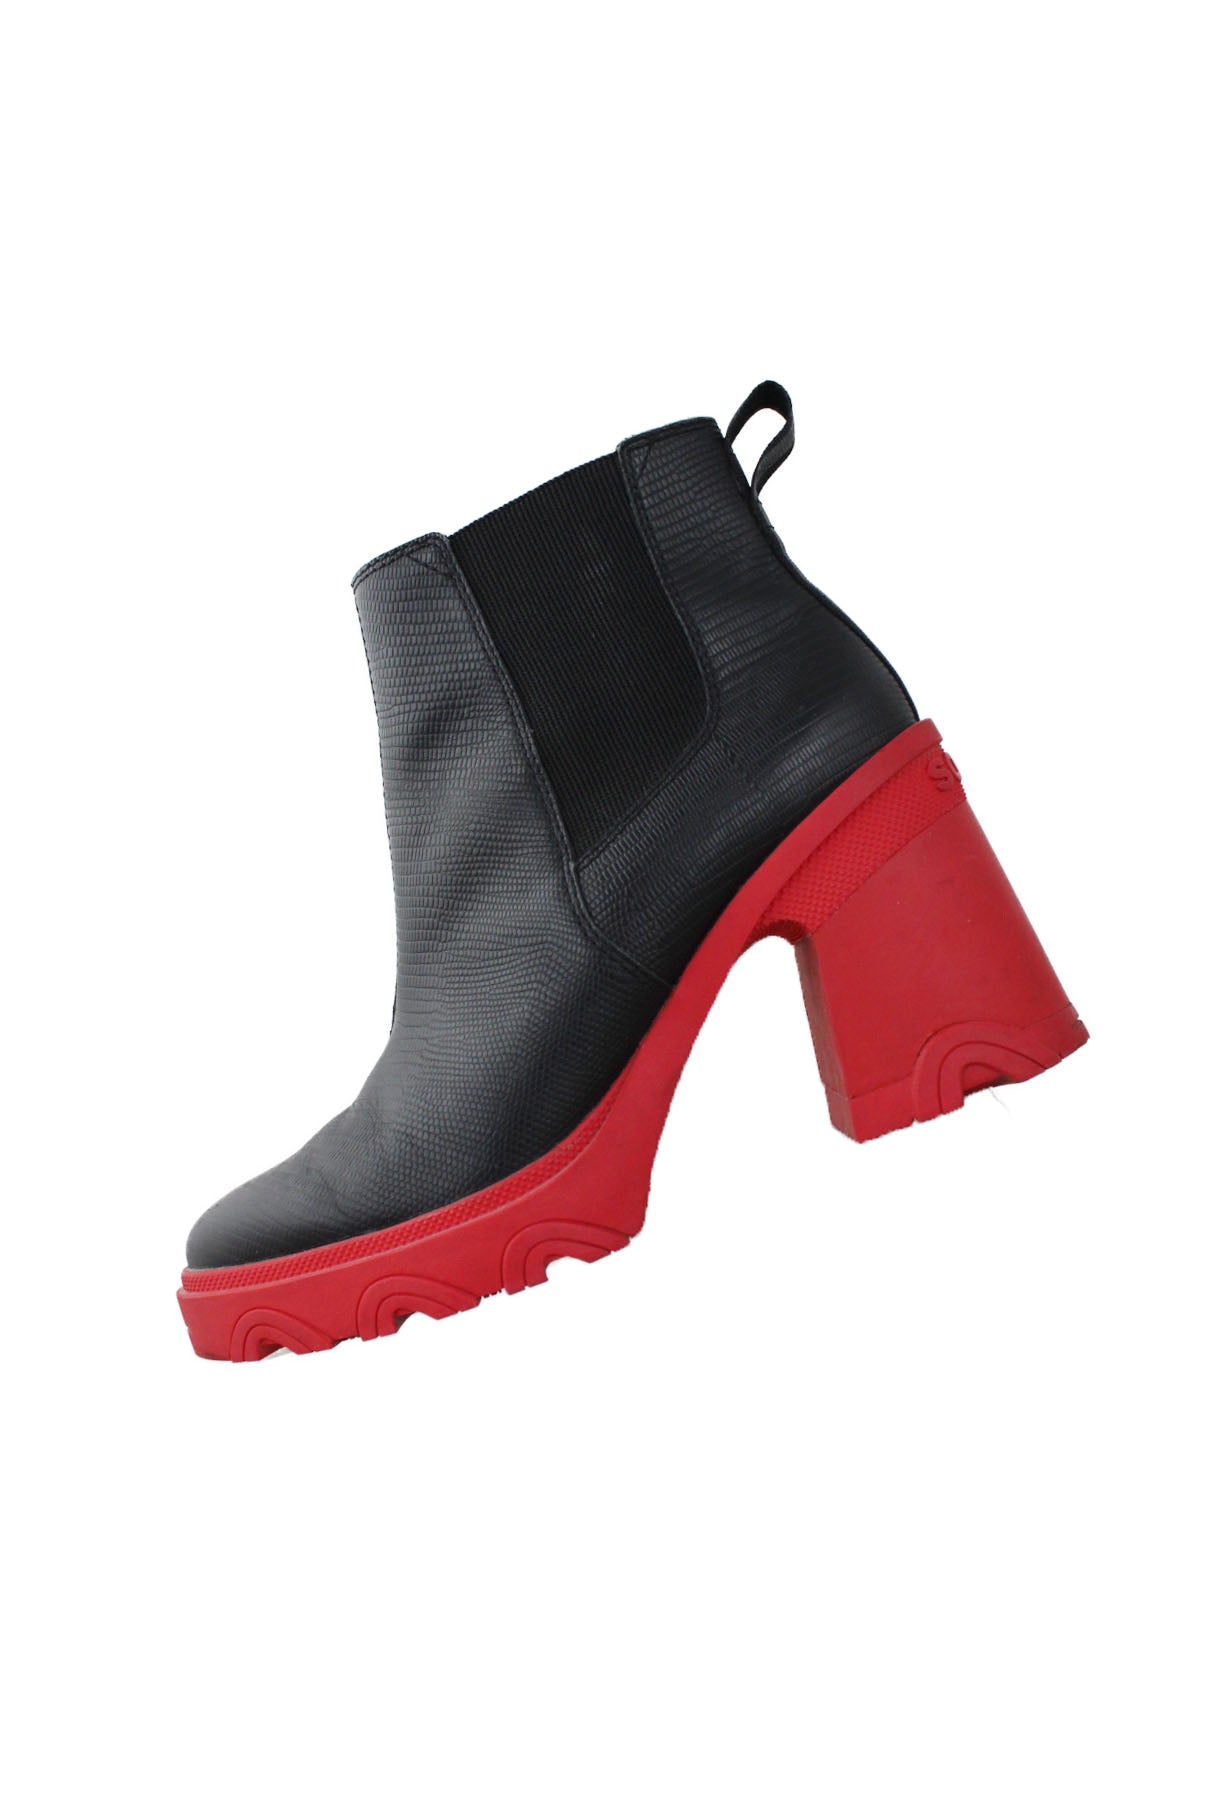 profile of sorel black and red chelsea ankle boots. features crocodile texture throughout, rounded toe, elastic at sides, red platform sole, and slip on fit. 